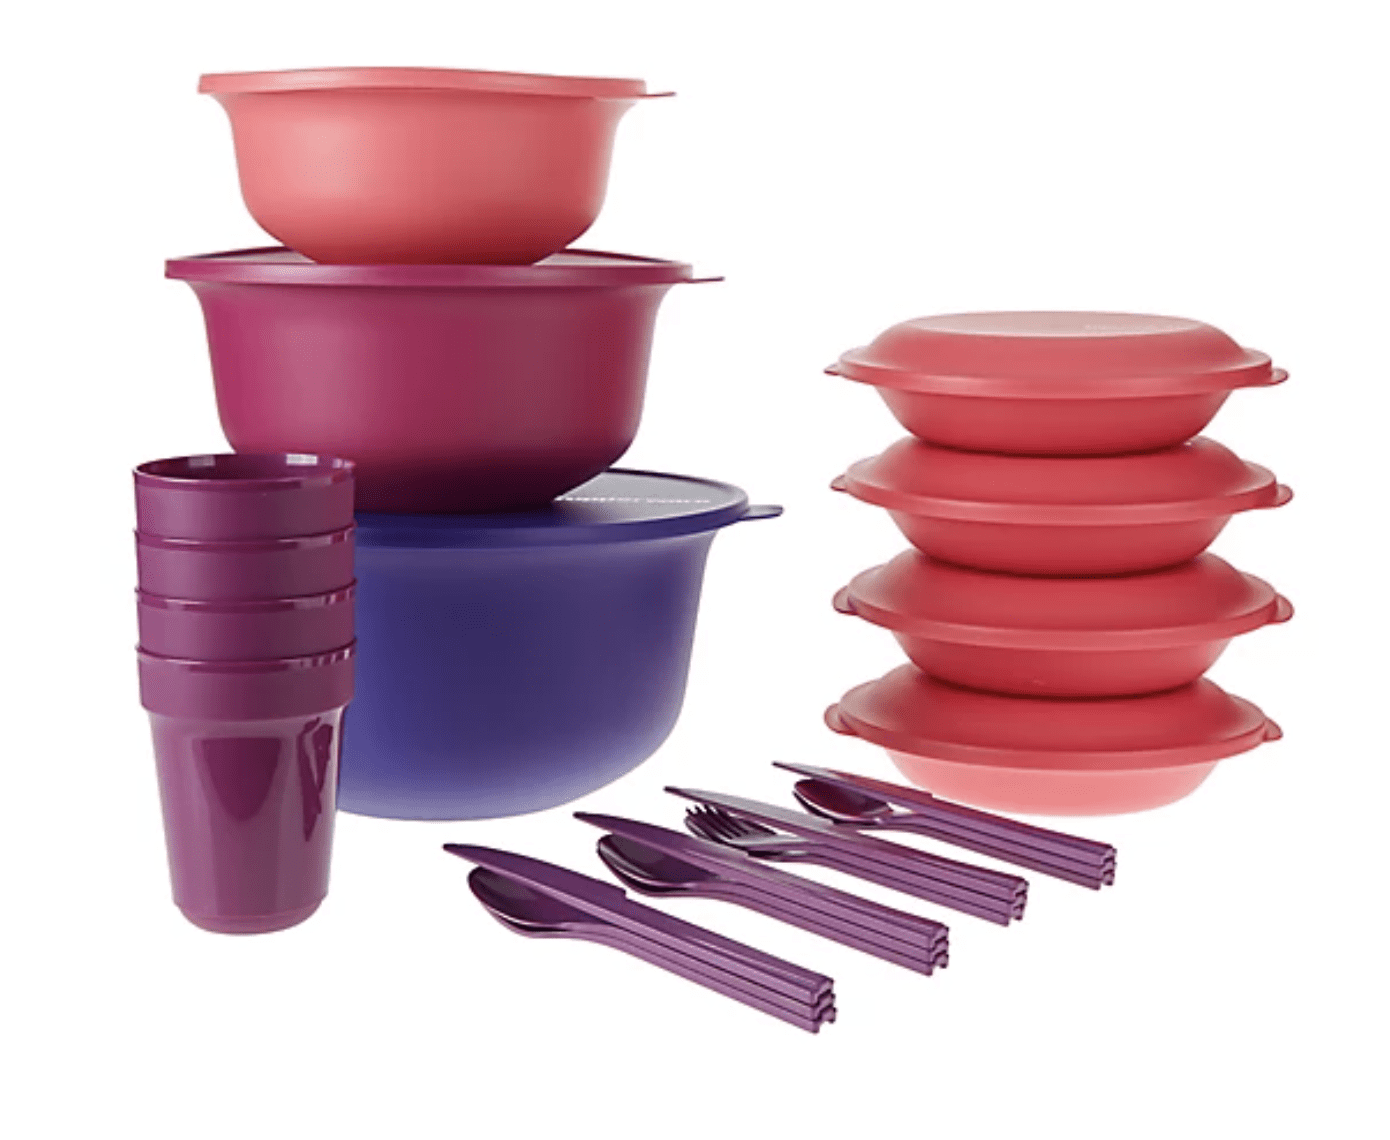 http://cdn.apartmenttherapy.info/image/upload/v1661361851/gen-workflow/product-database/TUPPERWARE_All_Together_Picnic_30_Piece_Food_Storage_Container_Set.png